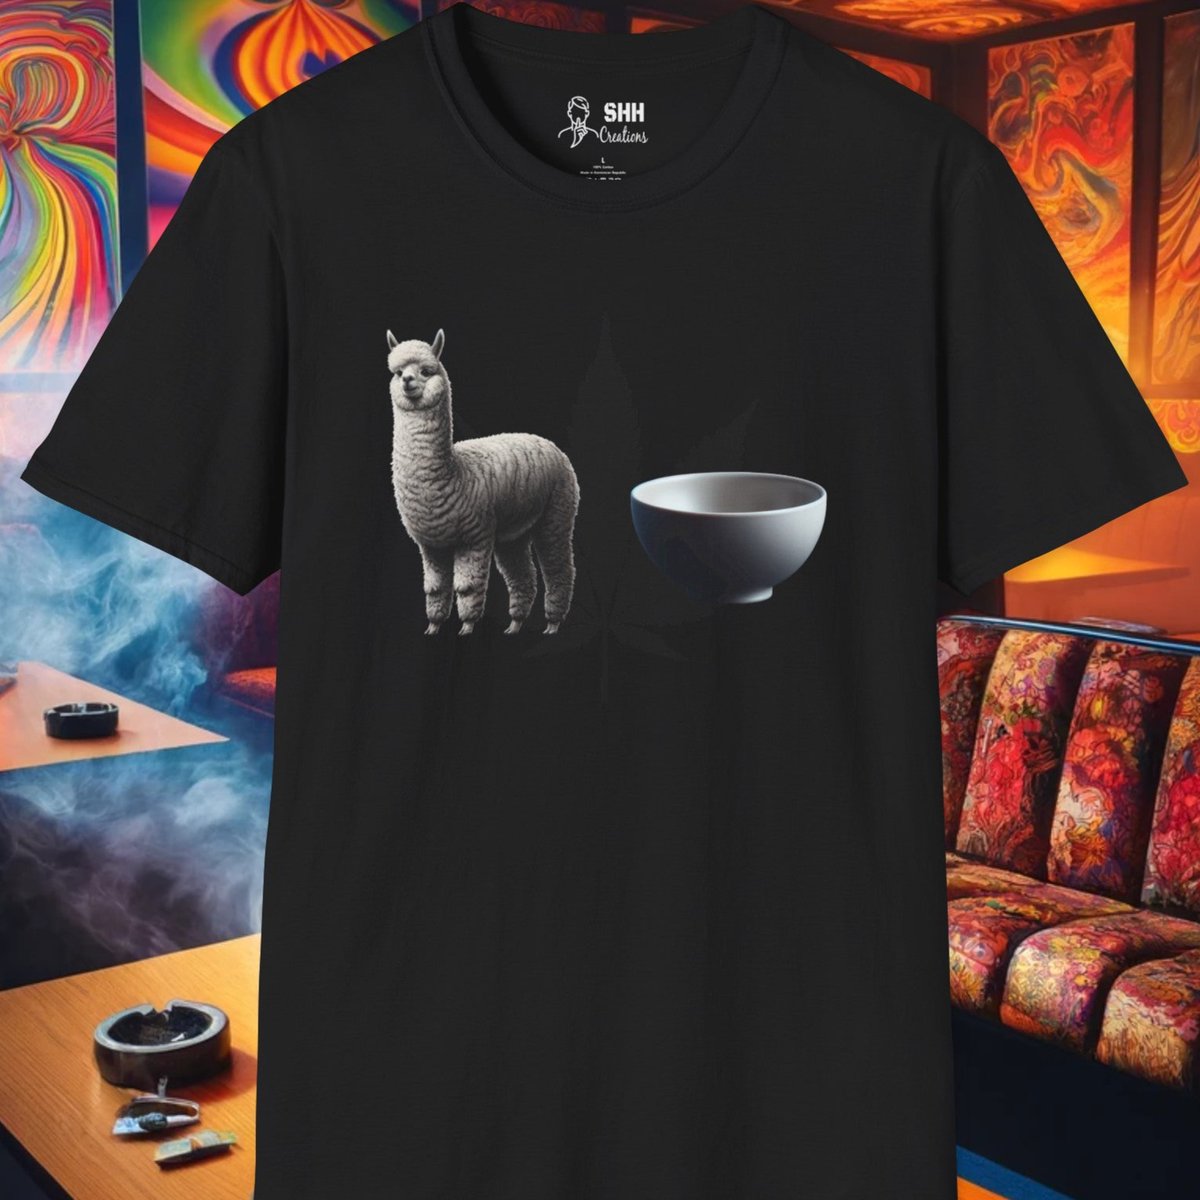 New in stock! Our 'Alpaca Bowl' Tee will have you grinning 🦙🥣. A clever play on words, crafted with premium cotton for ultimate comfort. Add some humor to your style! #CleverTees #AlpacaBowl #SHHCreations
shhcreations.com/products/alpac…